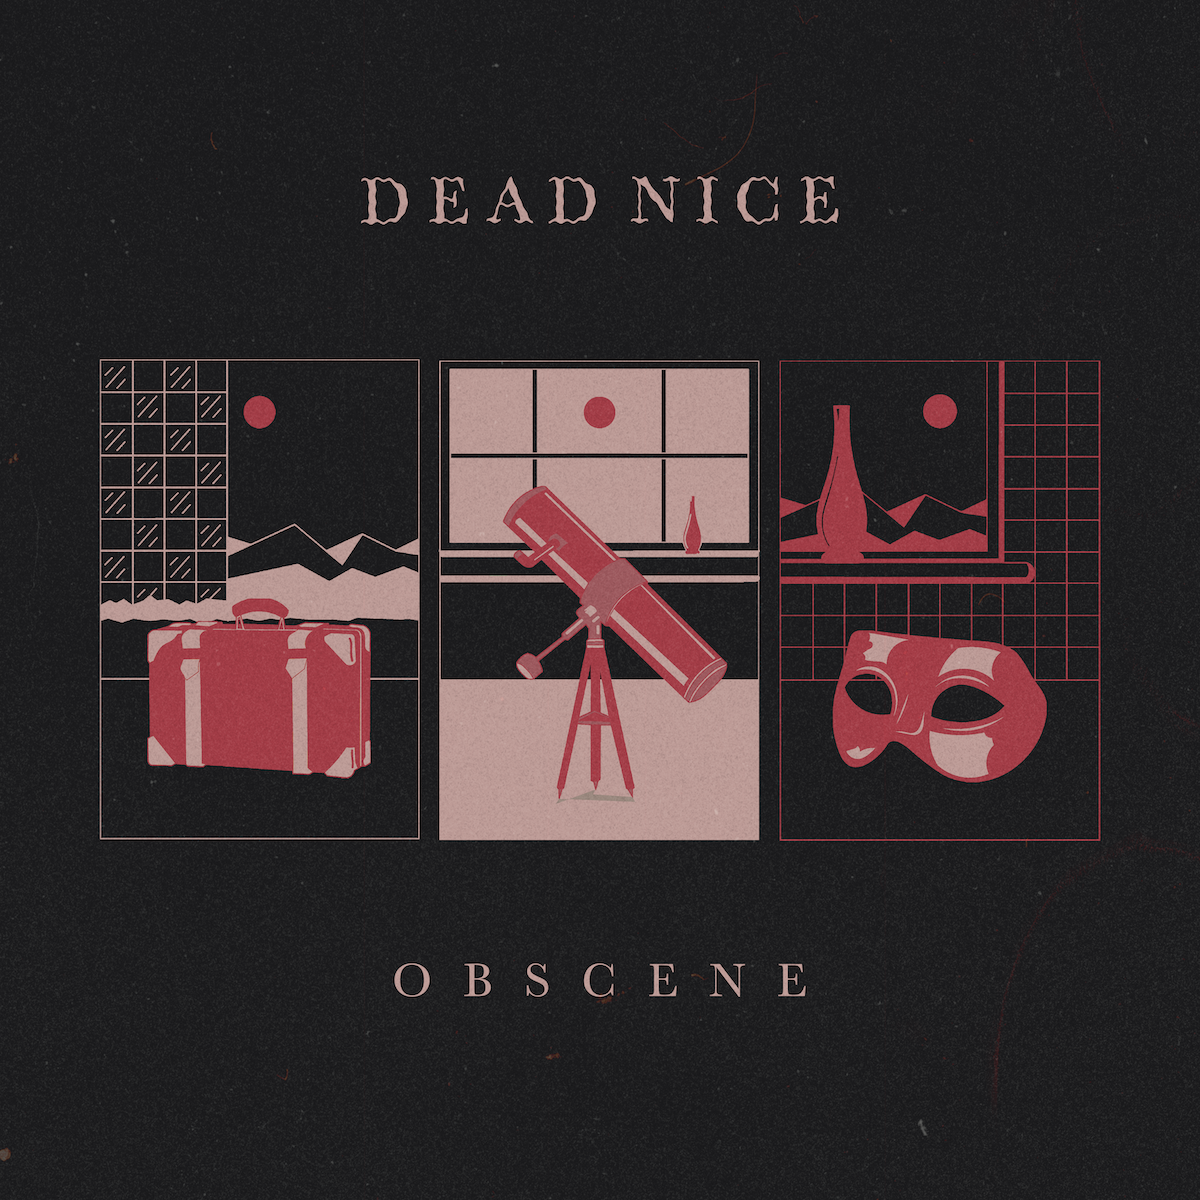 DEBUT EP REVIEW: Obscene by dead nice